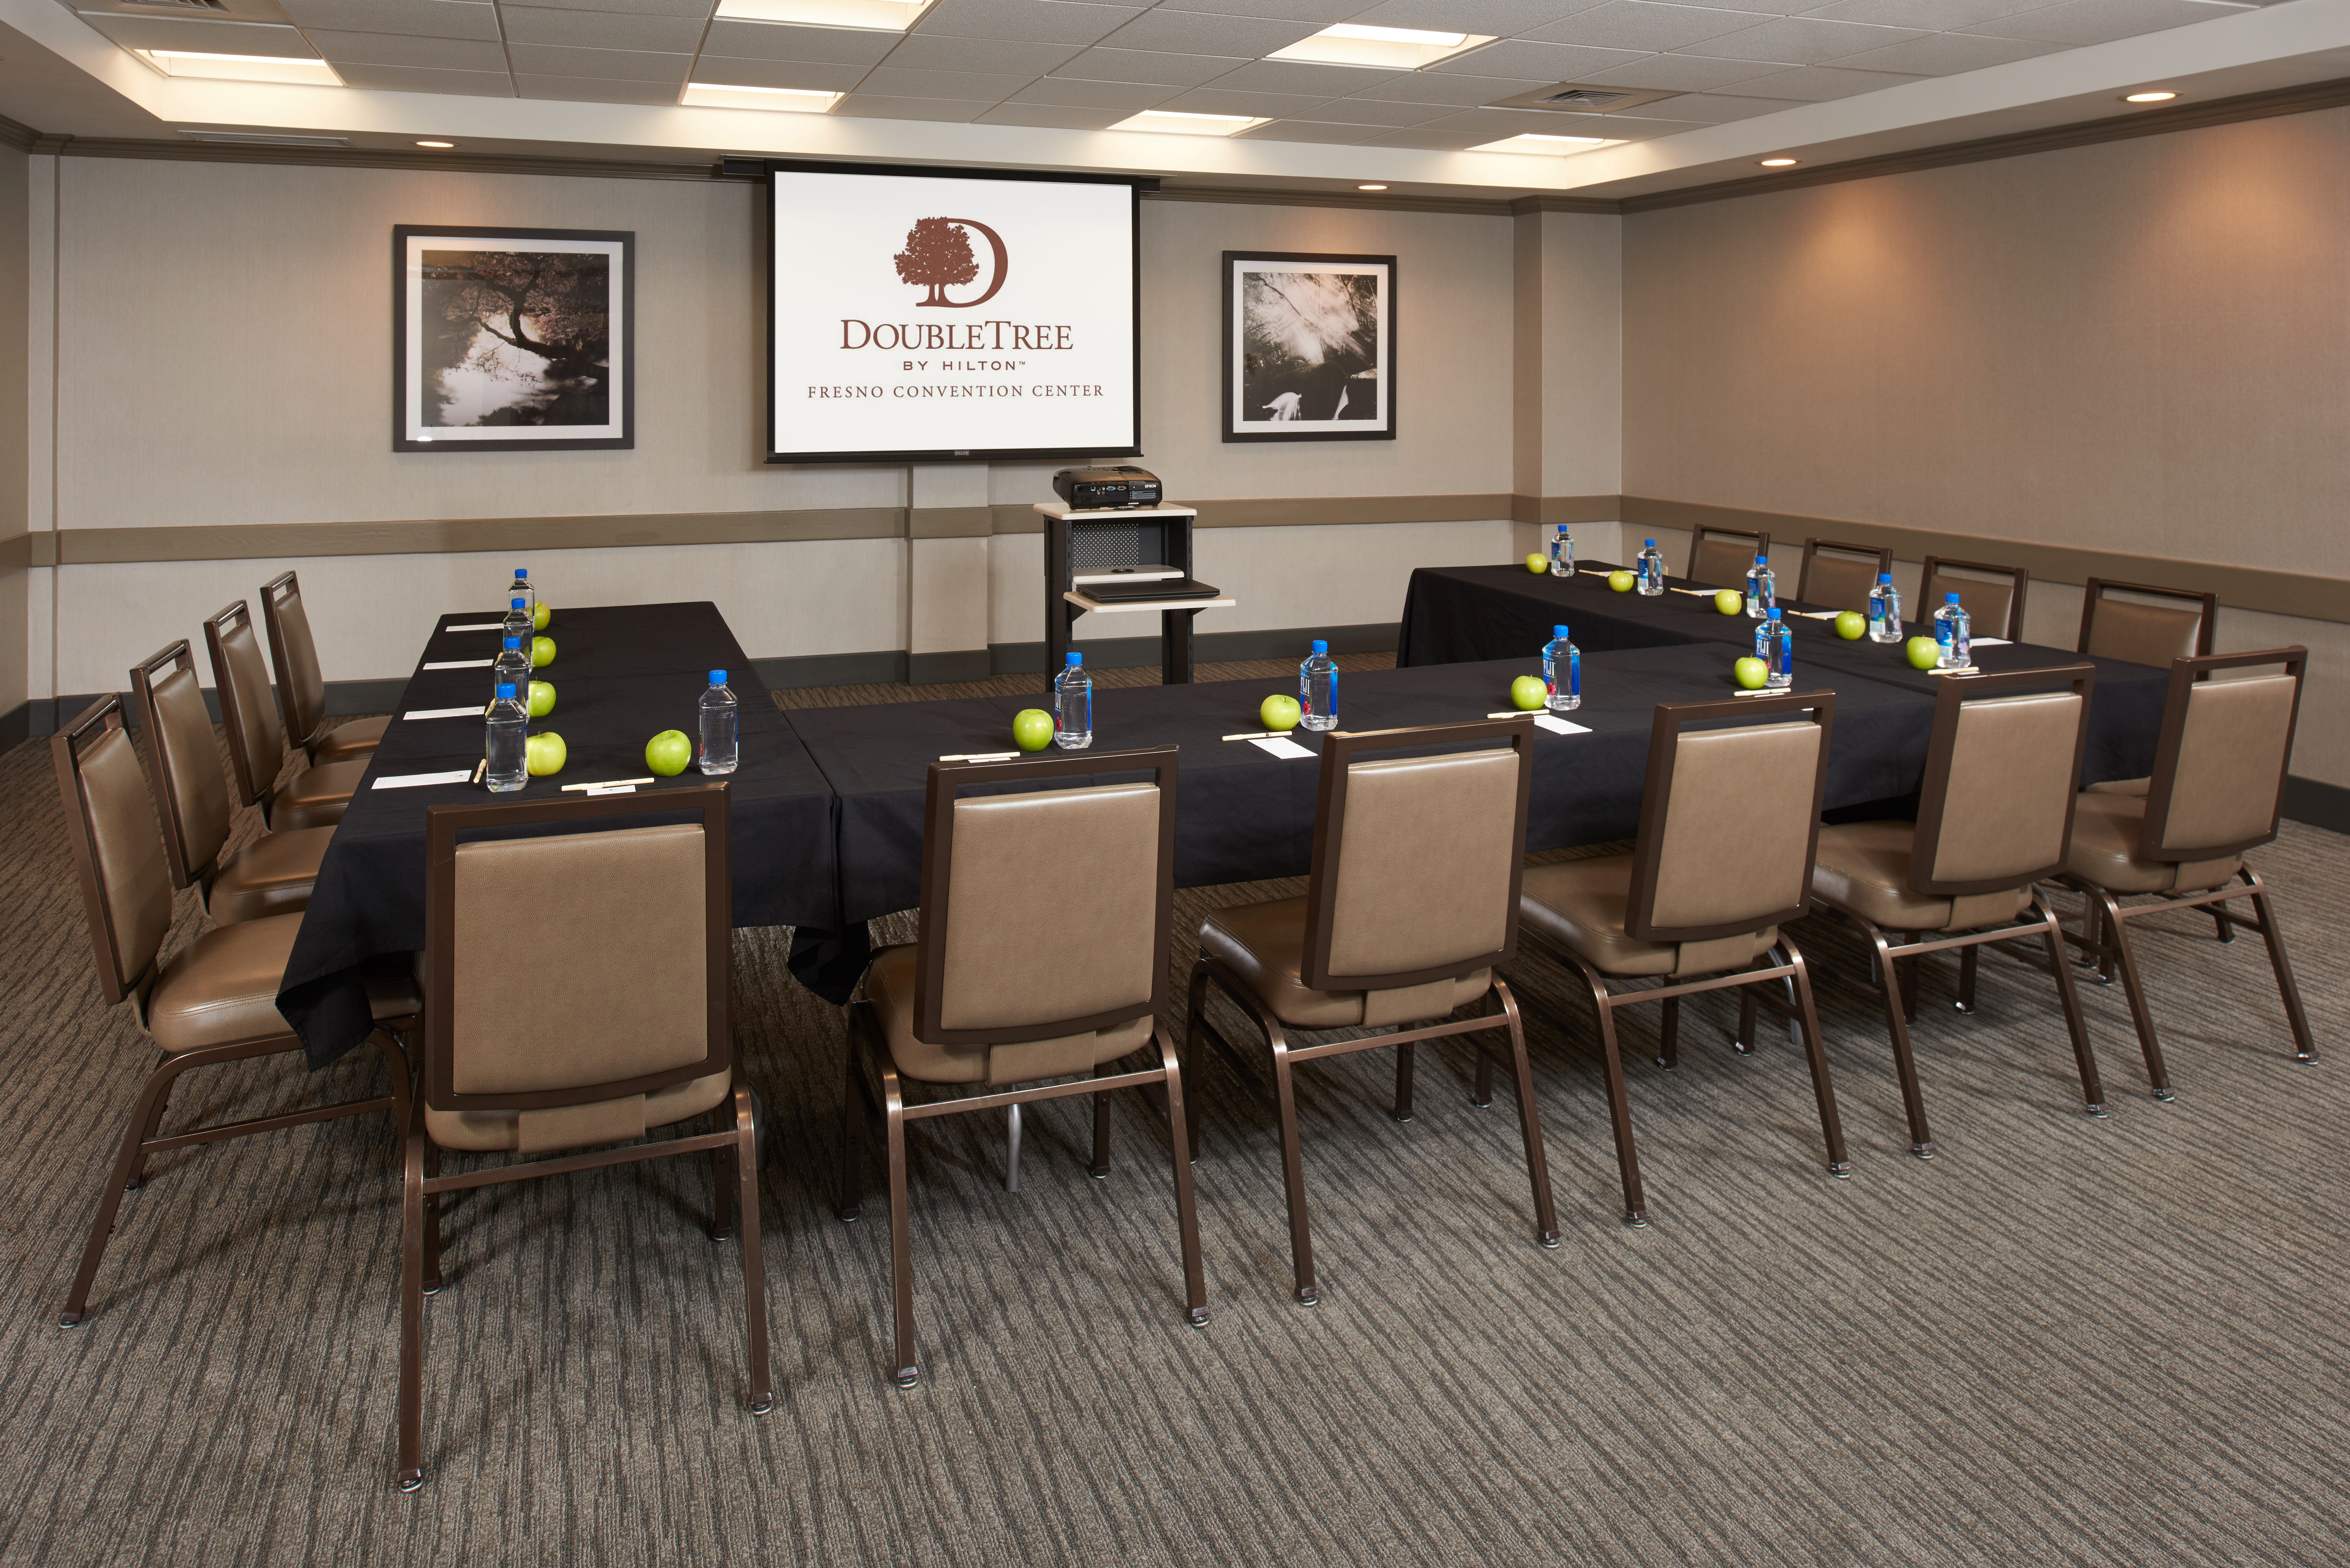 Sierra Meeting Room With U-Shaped Table and 14 Chairs Facing Audio/Visual Equipment Table, Wall Art, and Presentation Screen